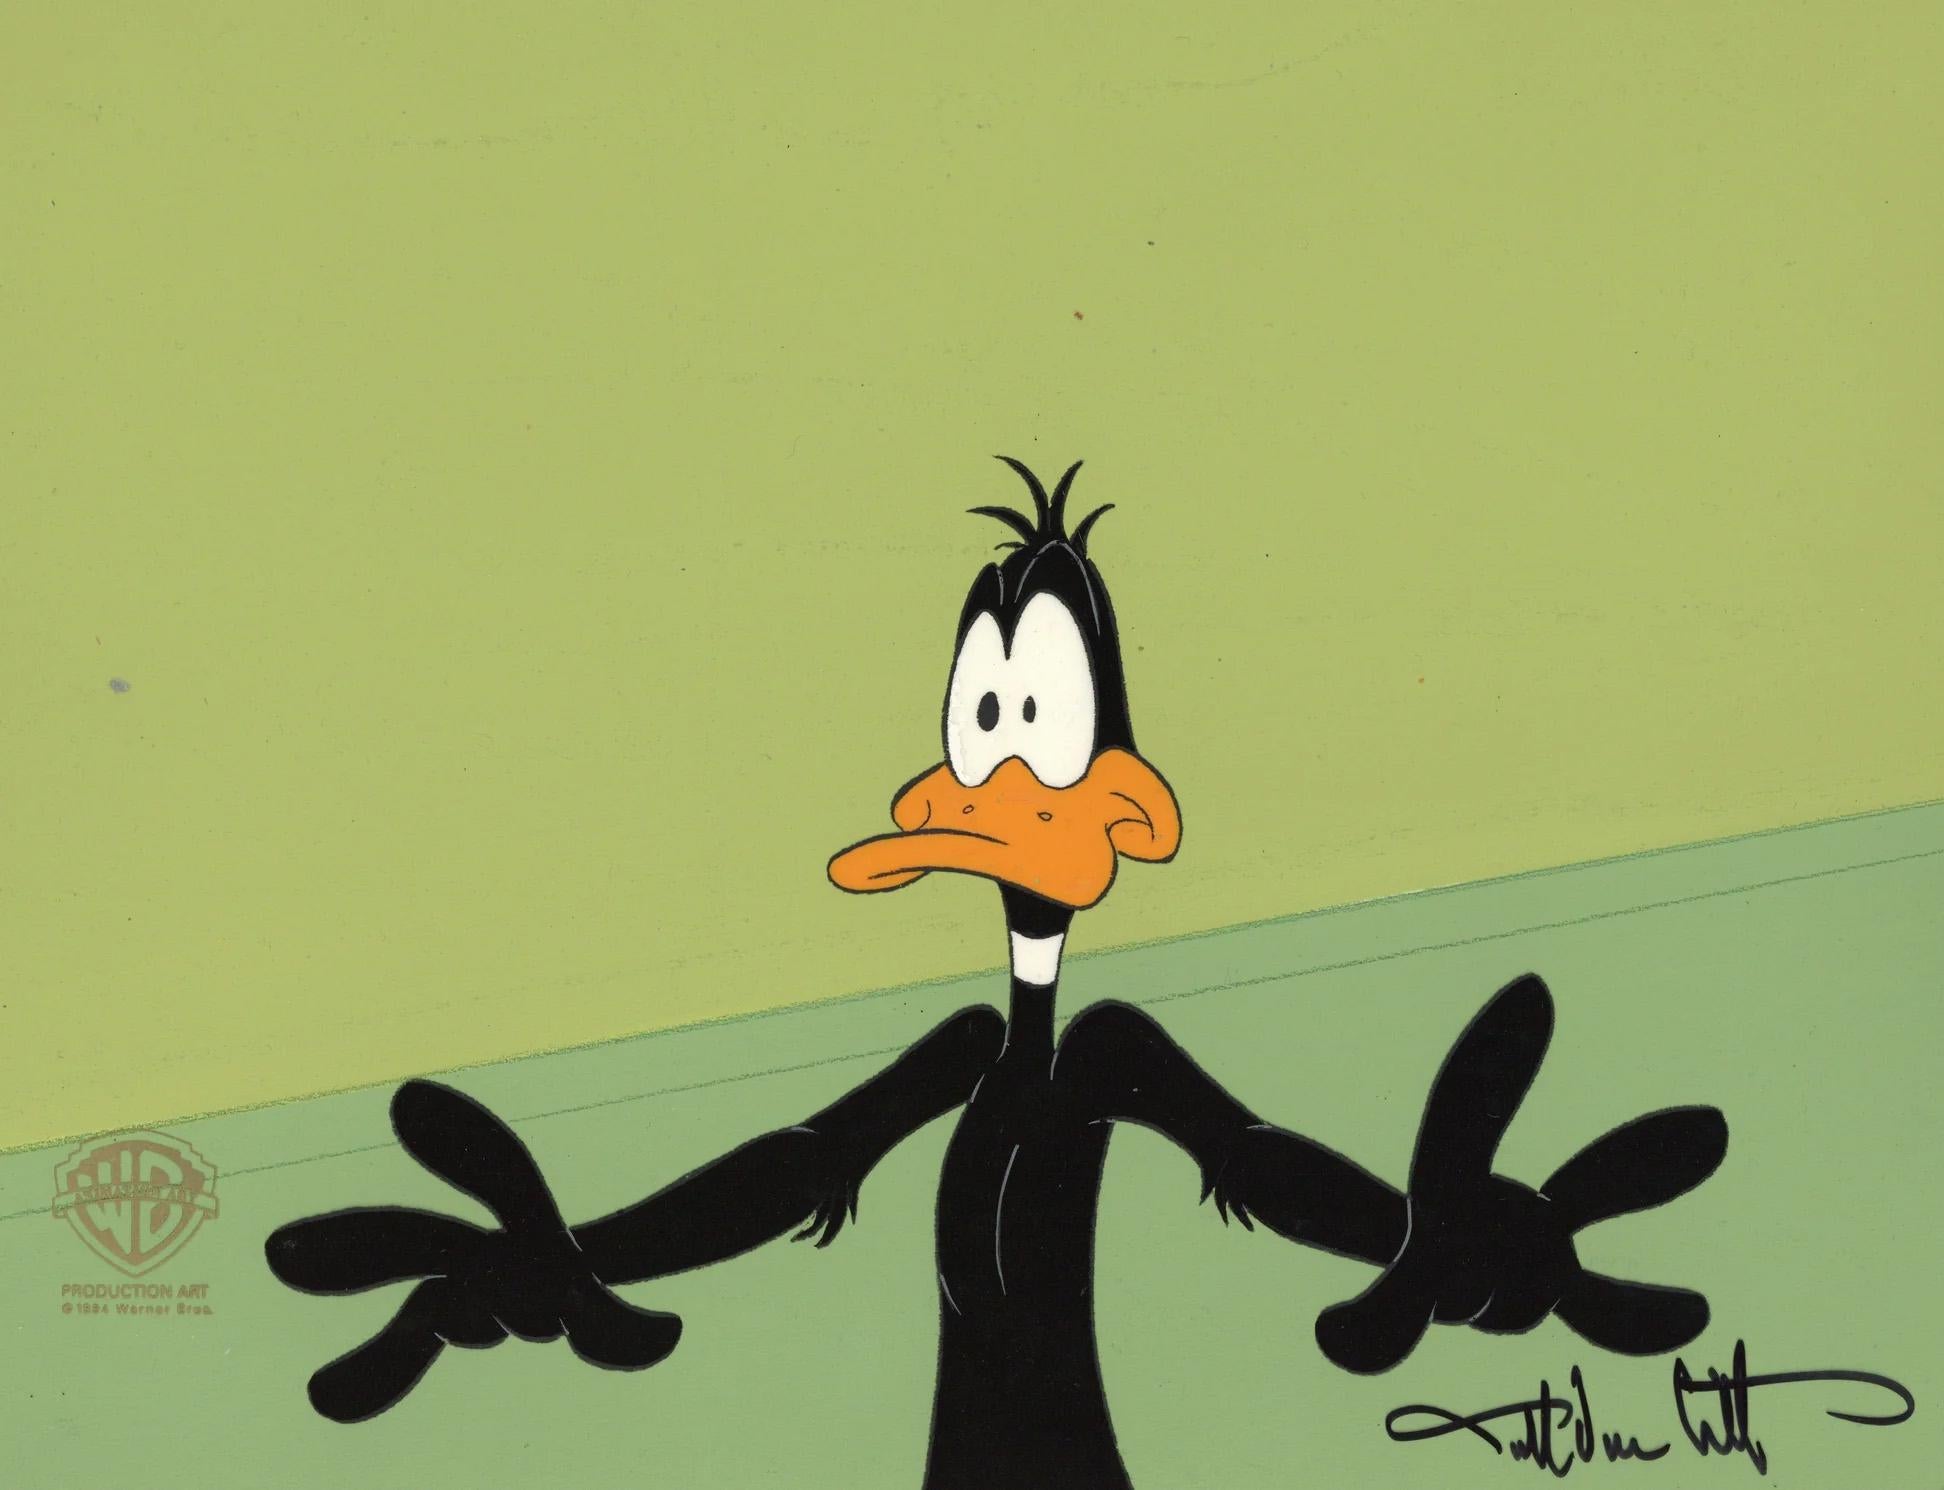 MEDIUM: Original Production Cel on Original Background 
IMAGE SIZE: 12.5" x 10.5"
PRODUCTION: Looney Tunes, Daffy Duck's Quackbusters
SKU: IFA9514
SIGNED: Darrel Van Citters

ABOUT THE IMAGE: Looney Tunes is a series of animated short films by